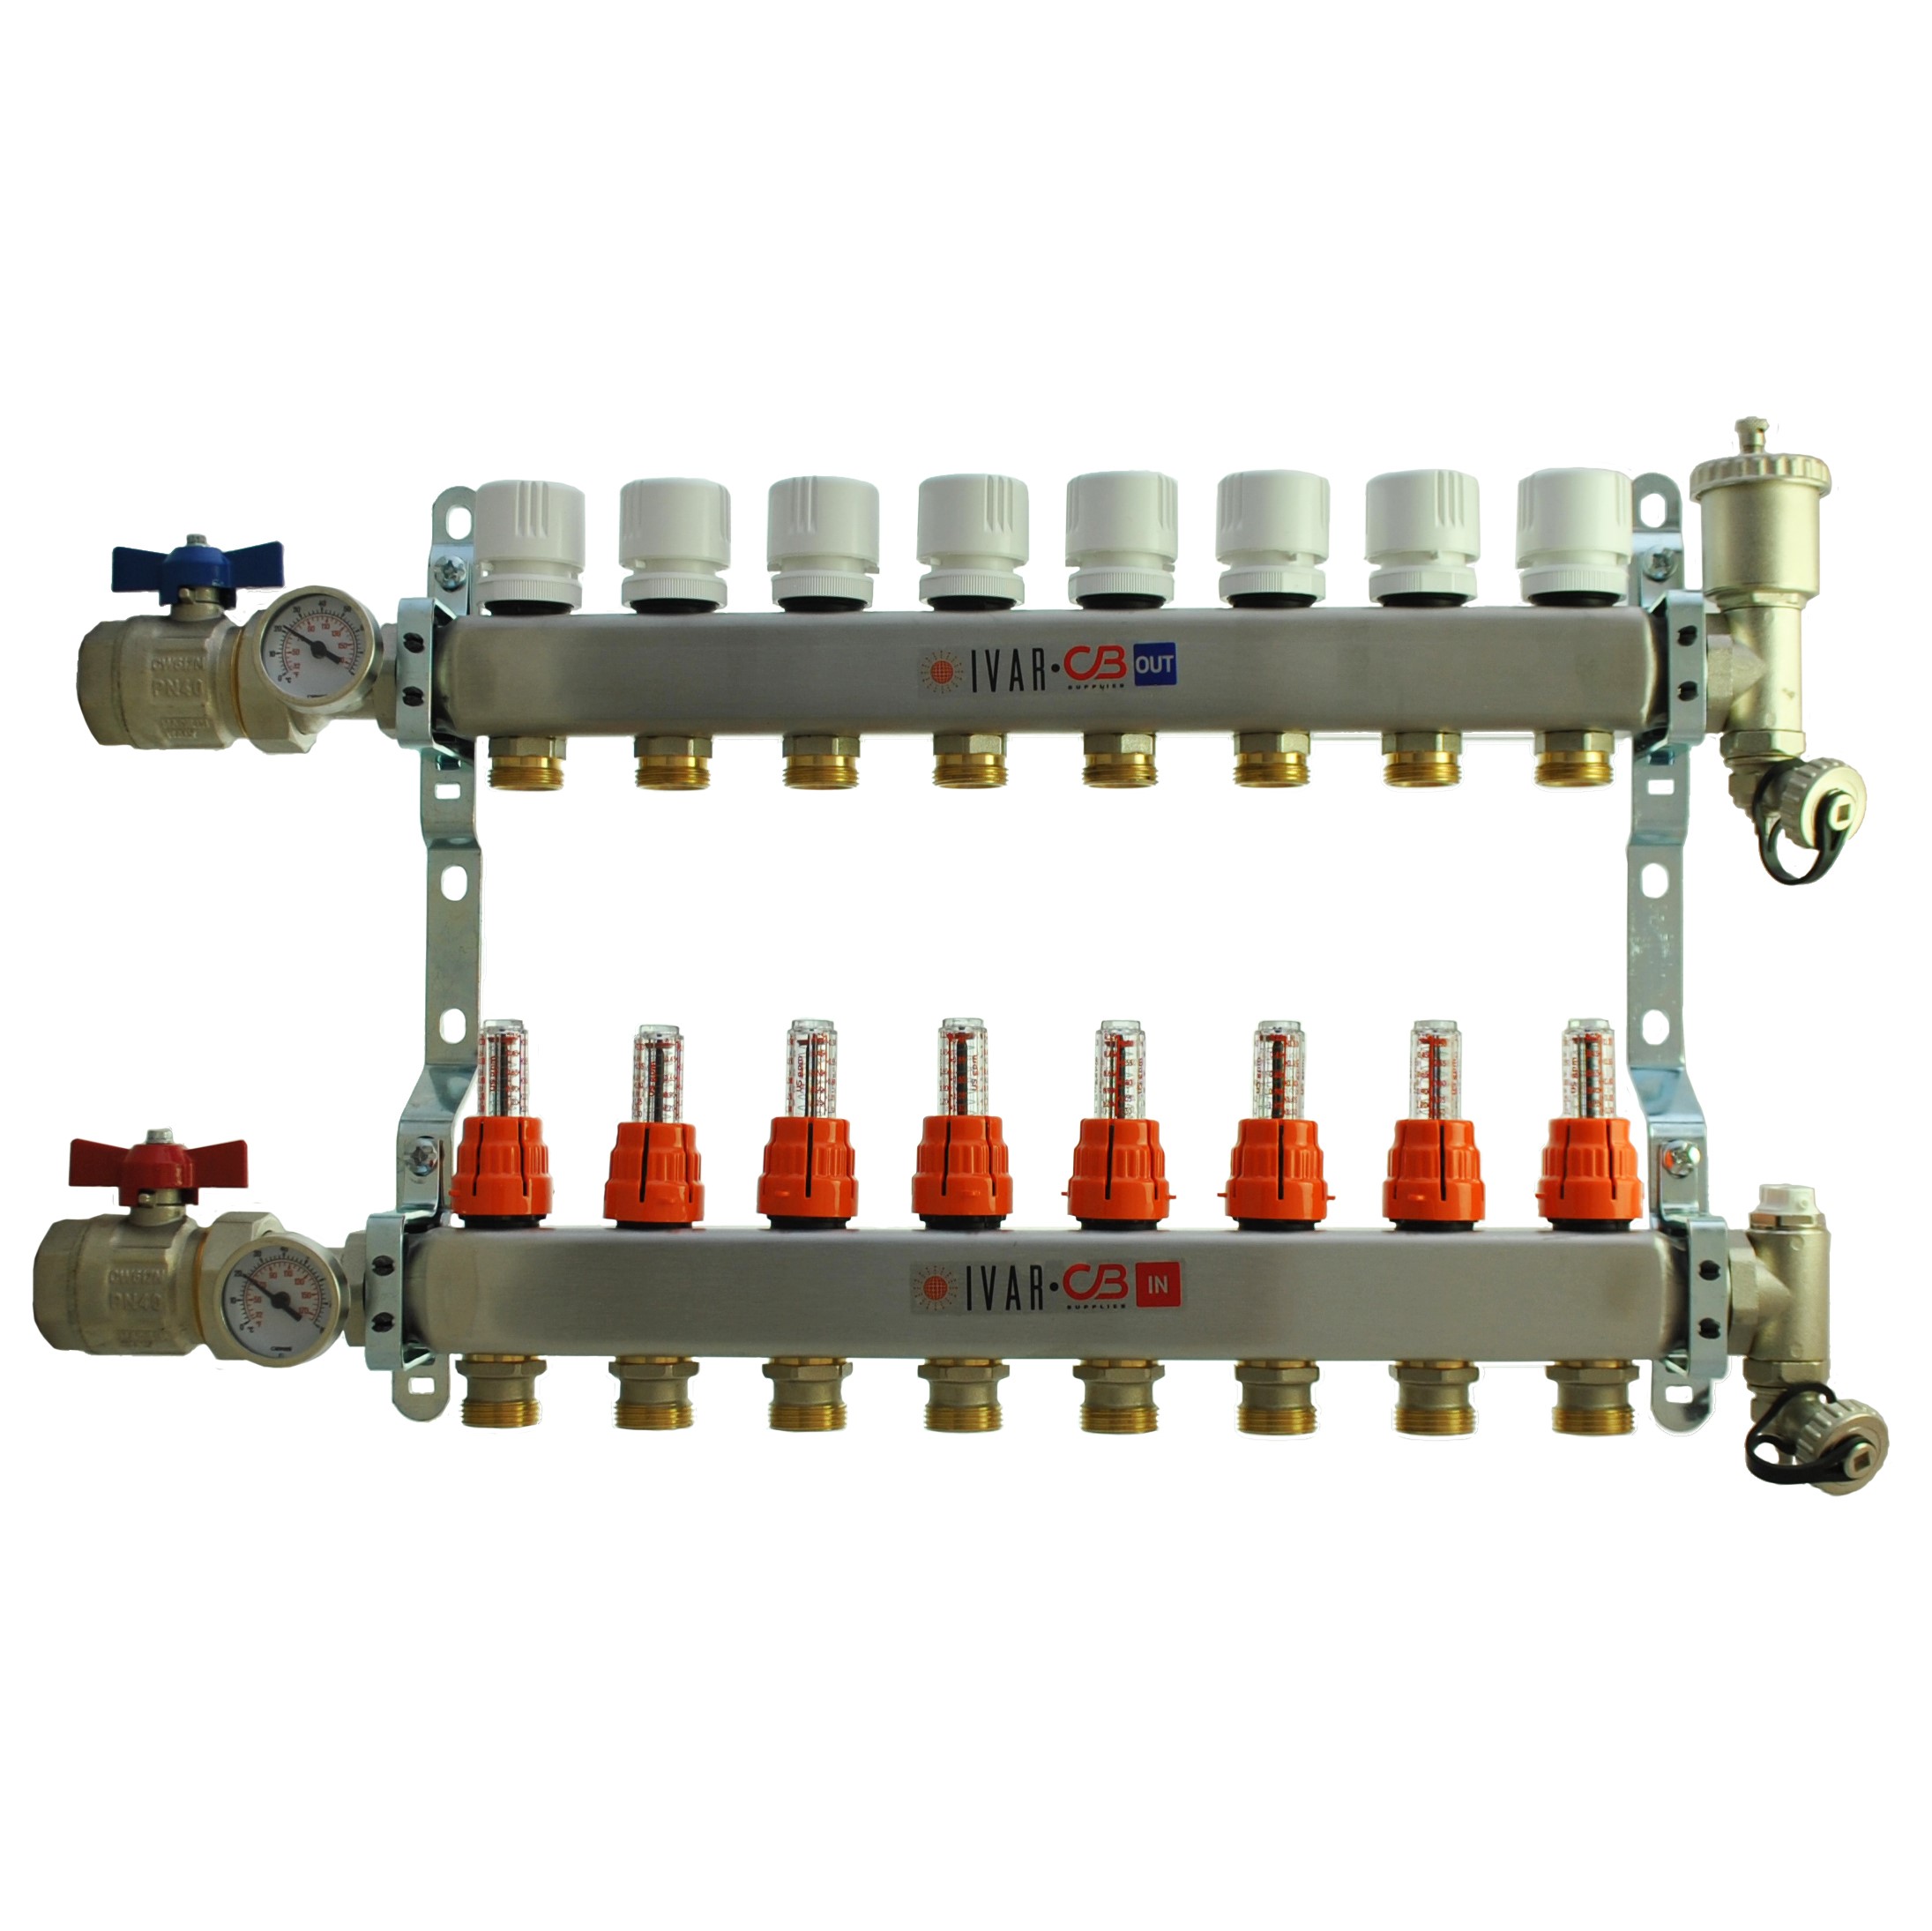 1" IVAR Stainless Steel Hydronic Manifold for Radiant Floor Heating - 8 ports